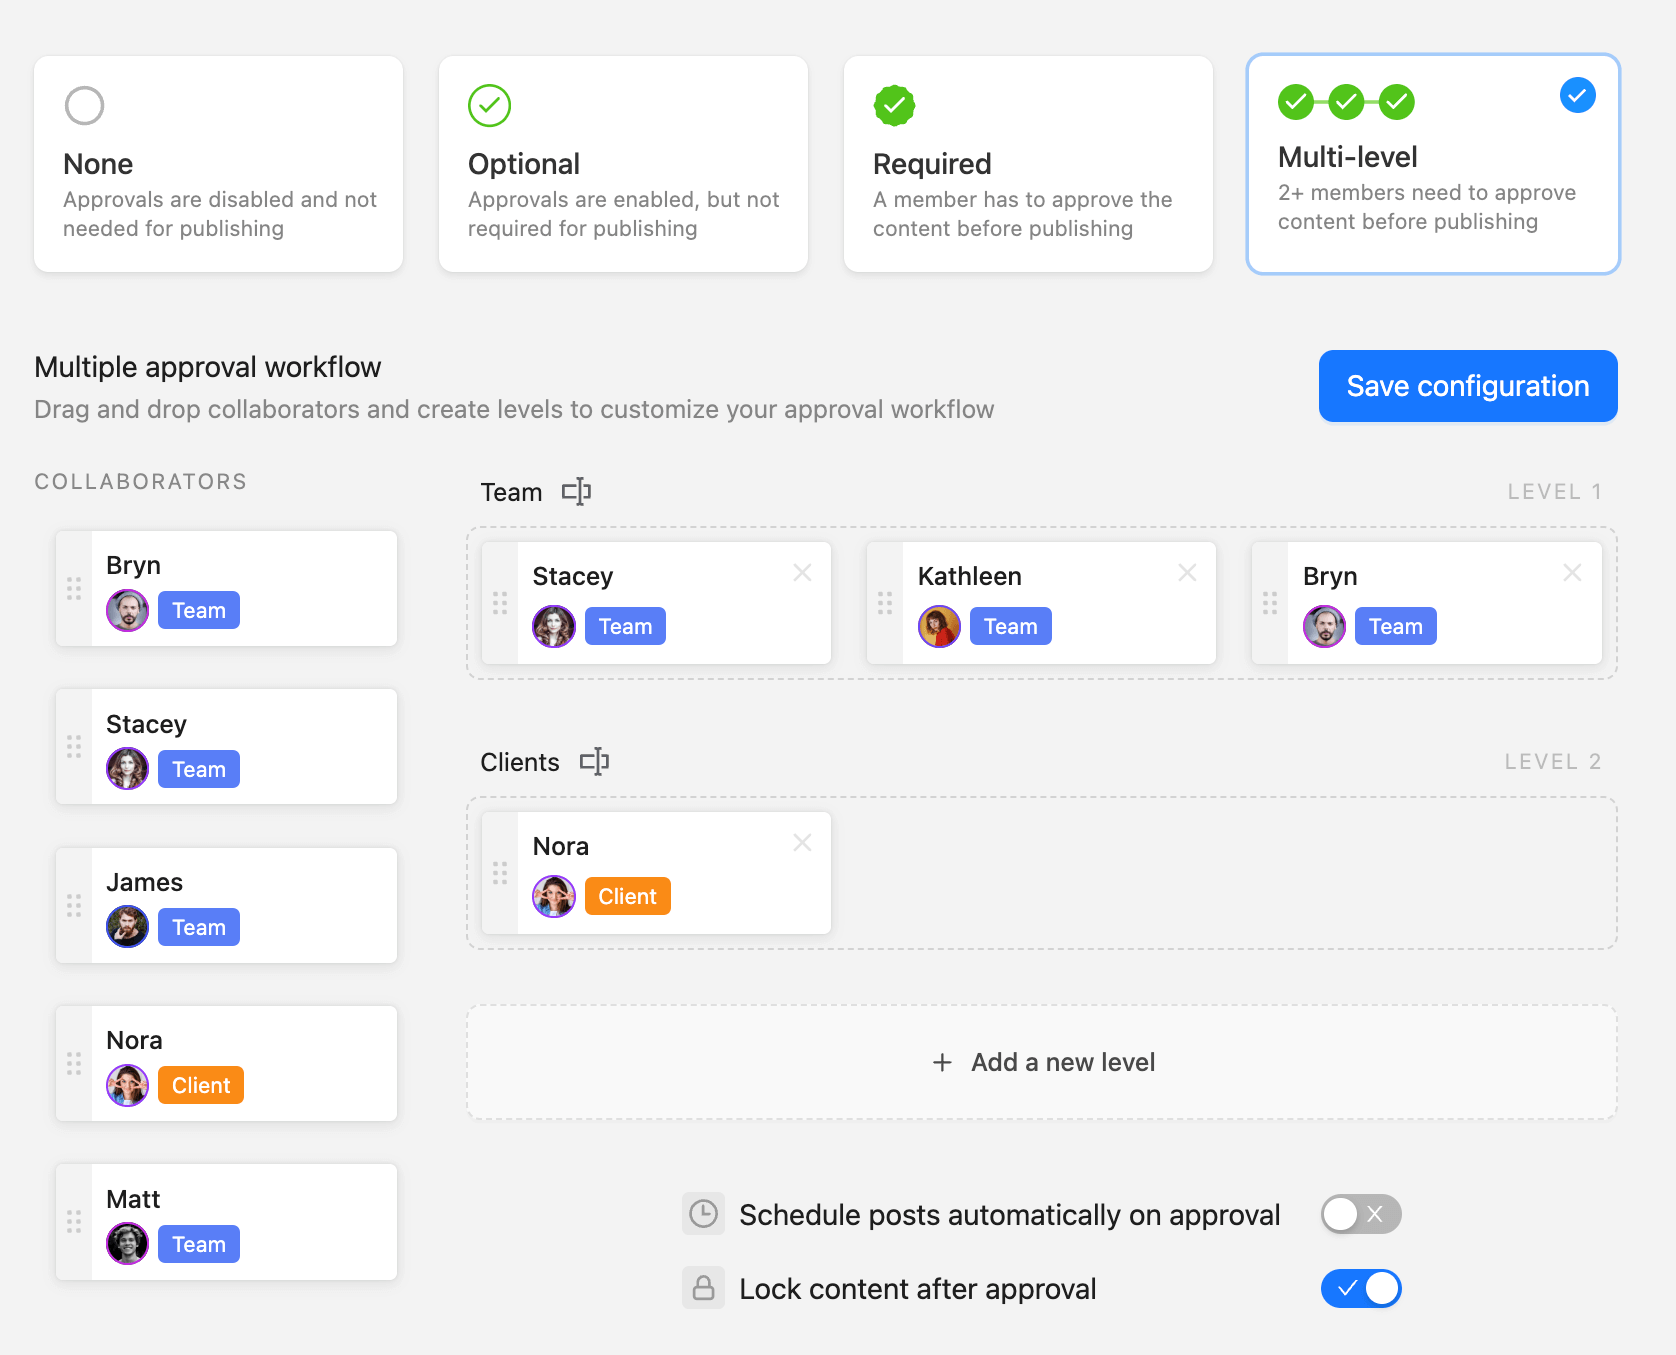 Content approval workflow configuration screen in Planable with options for approval levels, collaborators, and clients, featuring a multi-level approval process.